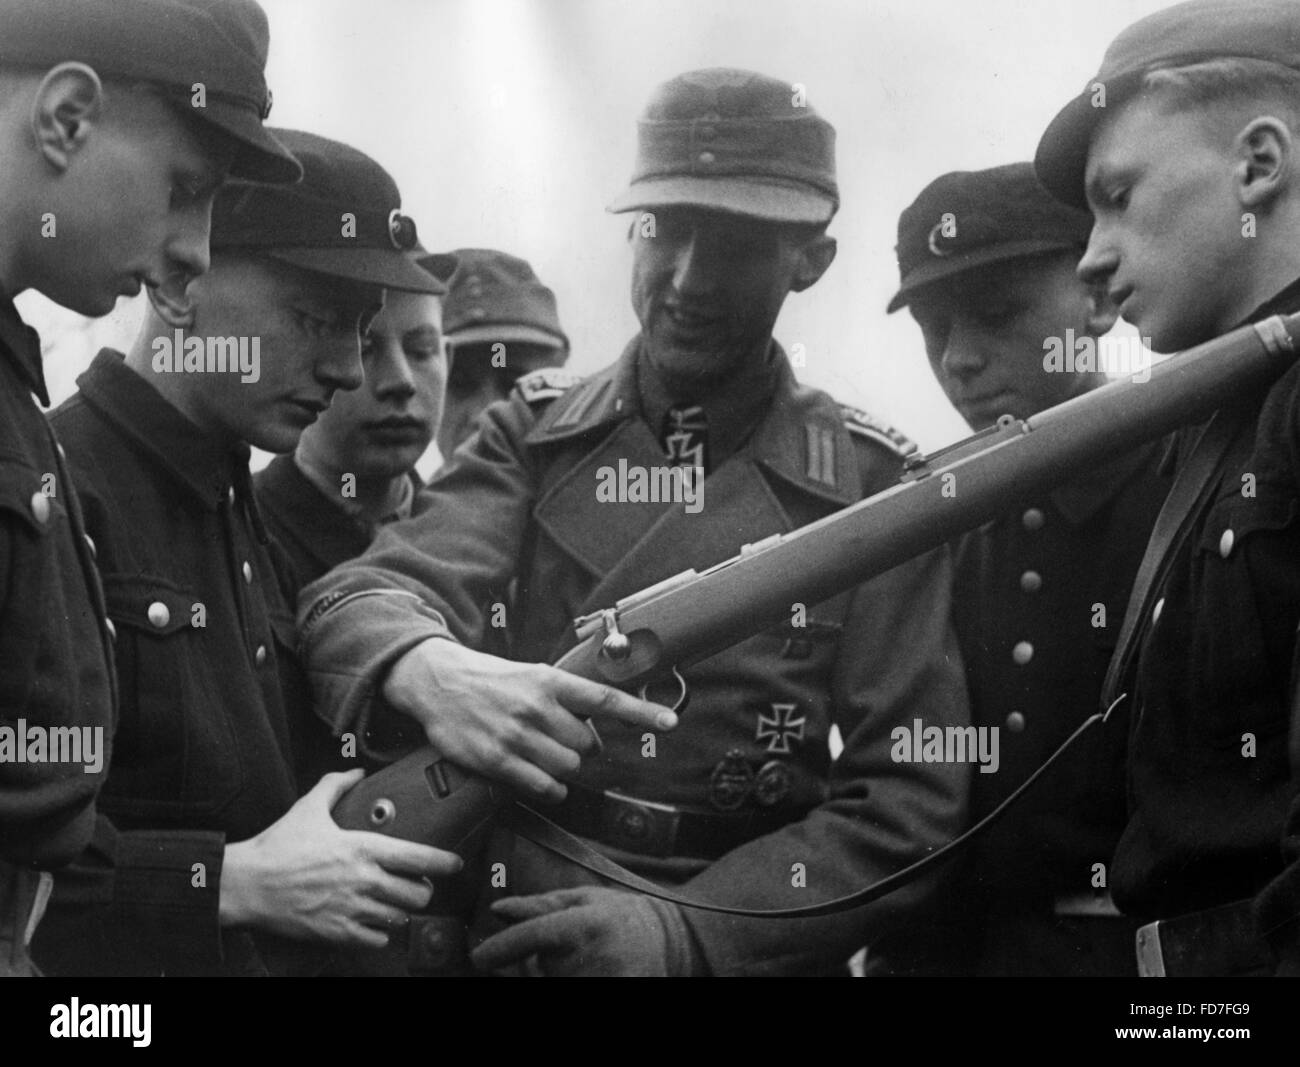 Weapons training in a HJ military training camp, 1944 Stock Photo